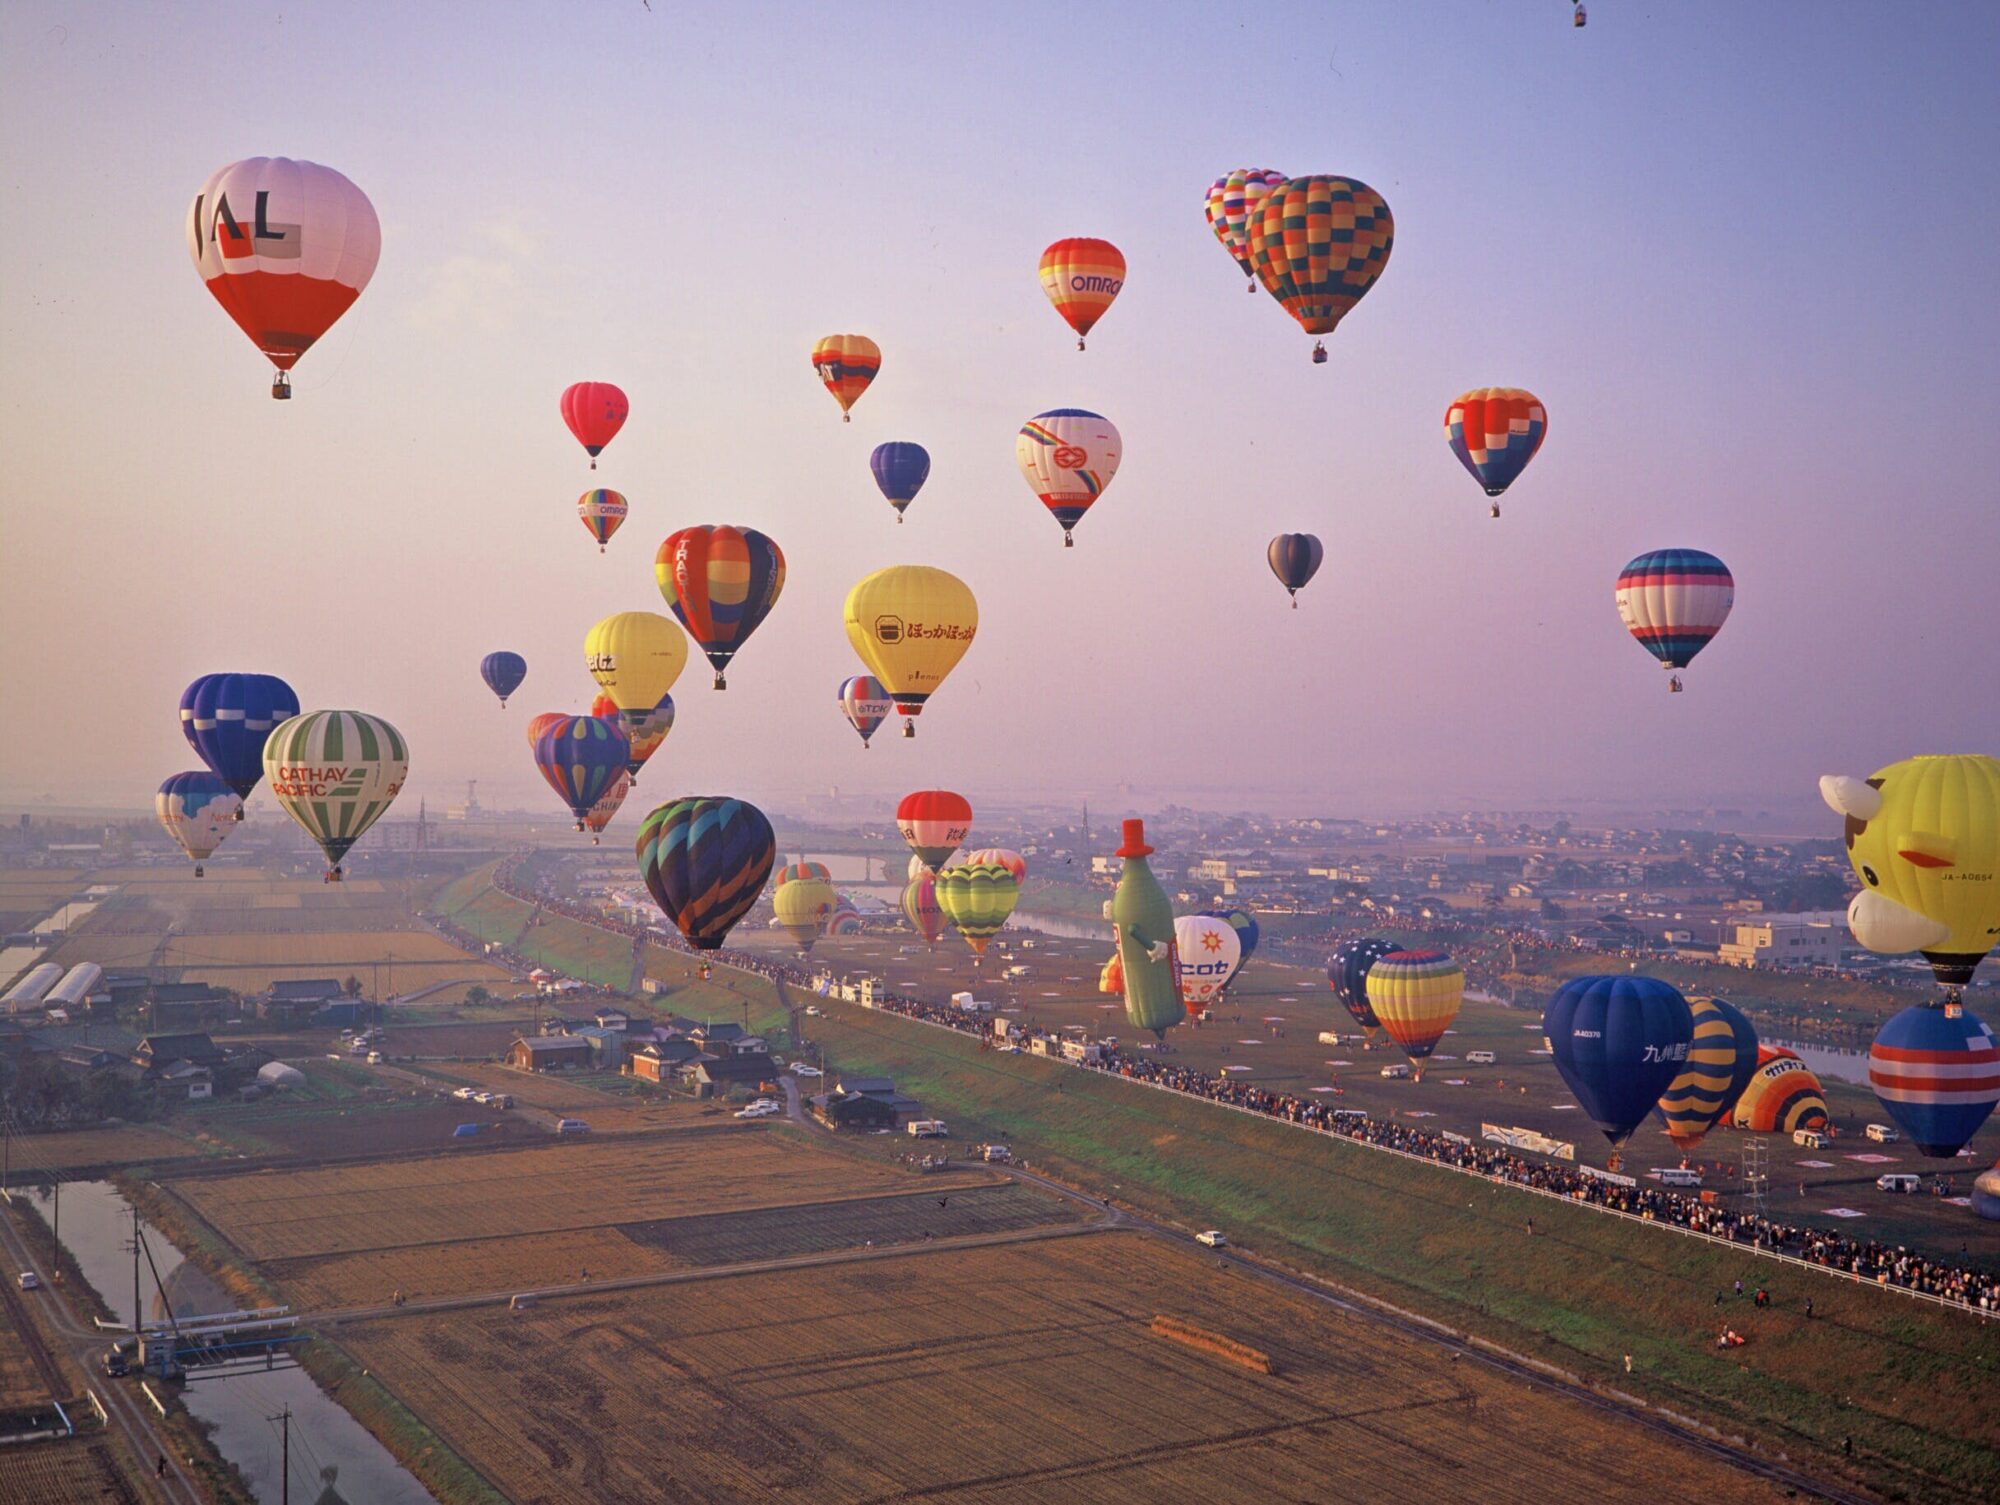 A colourful ballooning spectacle